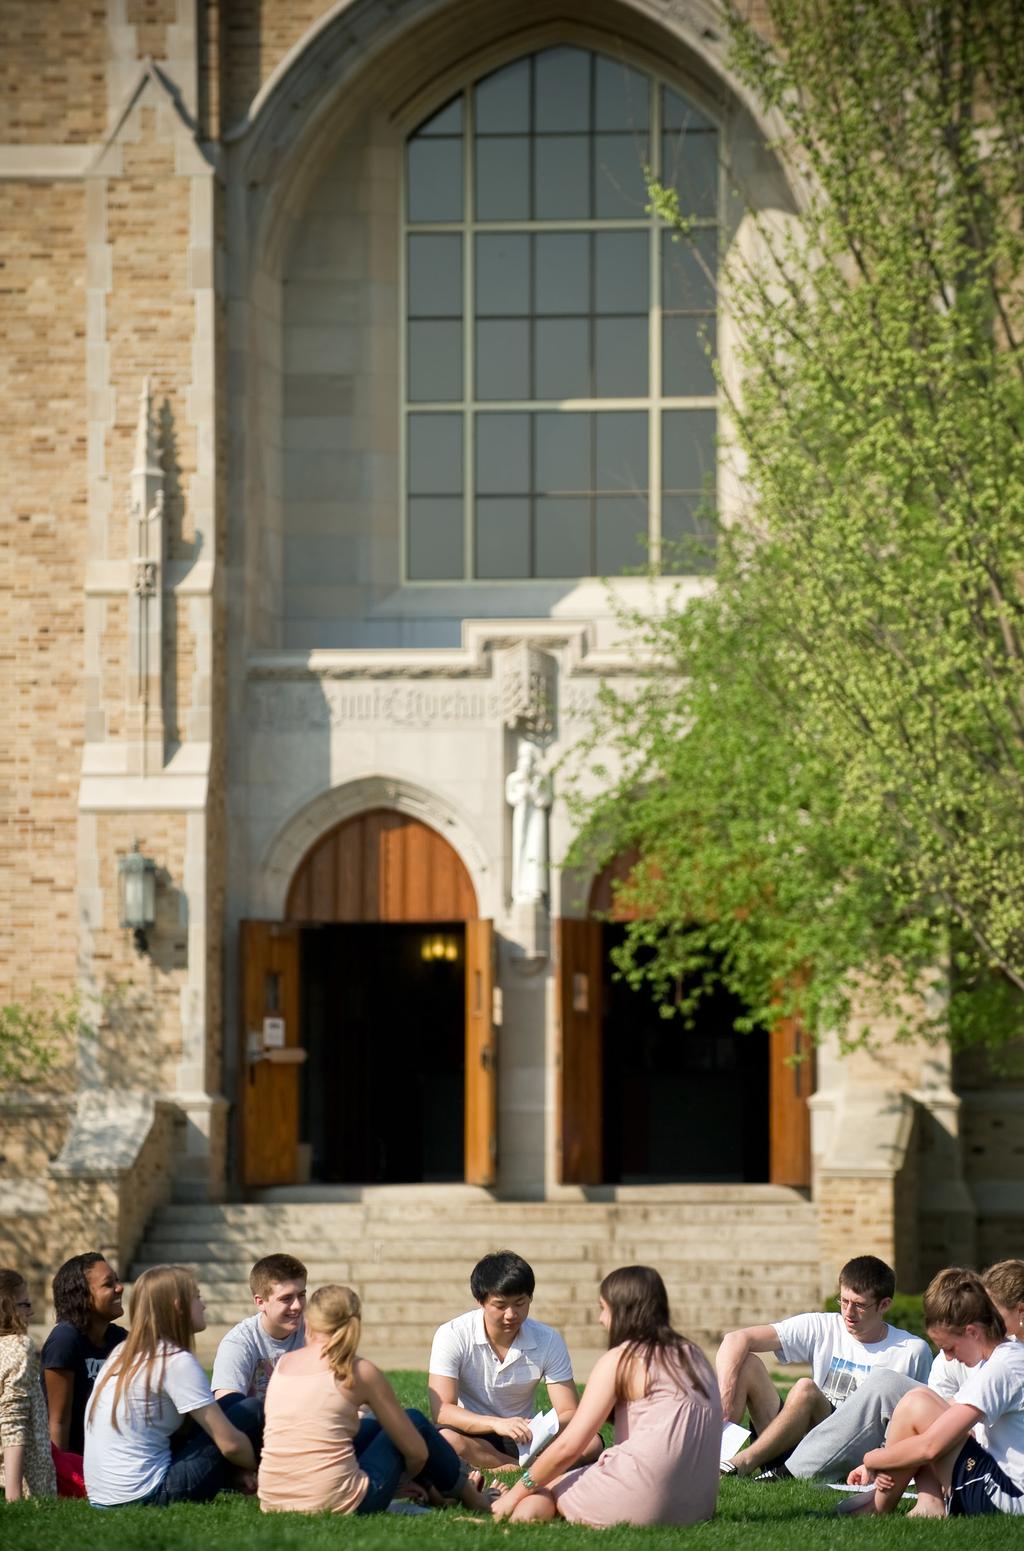 Approximately 80% of Notre Dame undergraduates live on campus, and many stay in the same hall